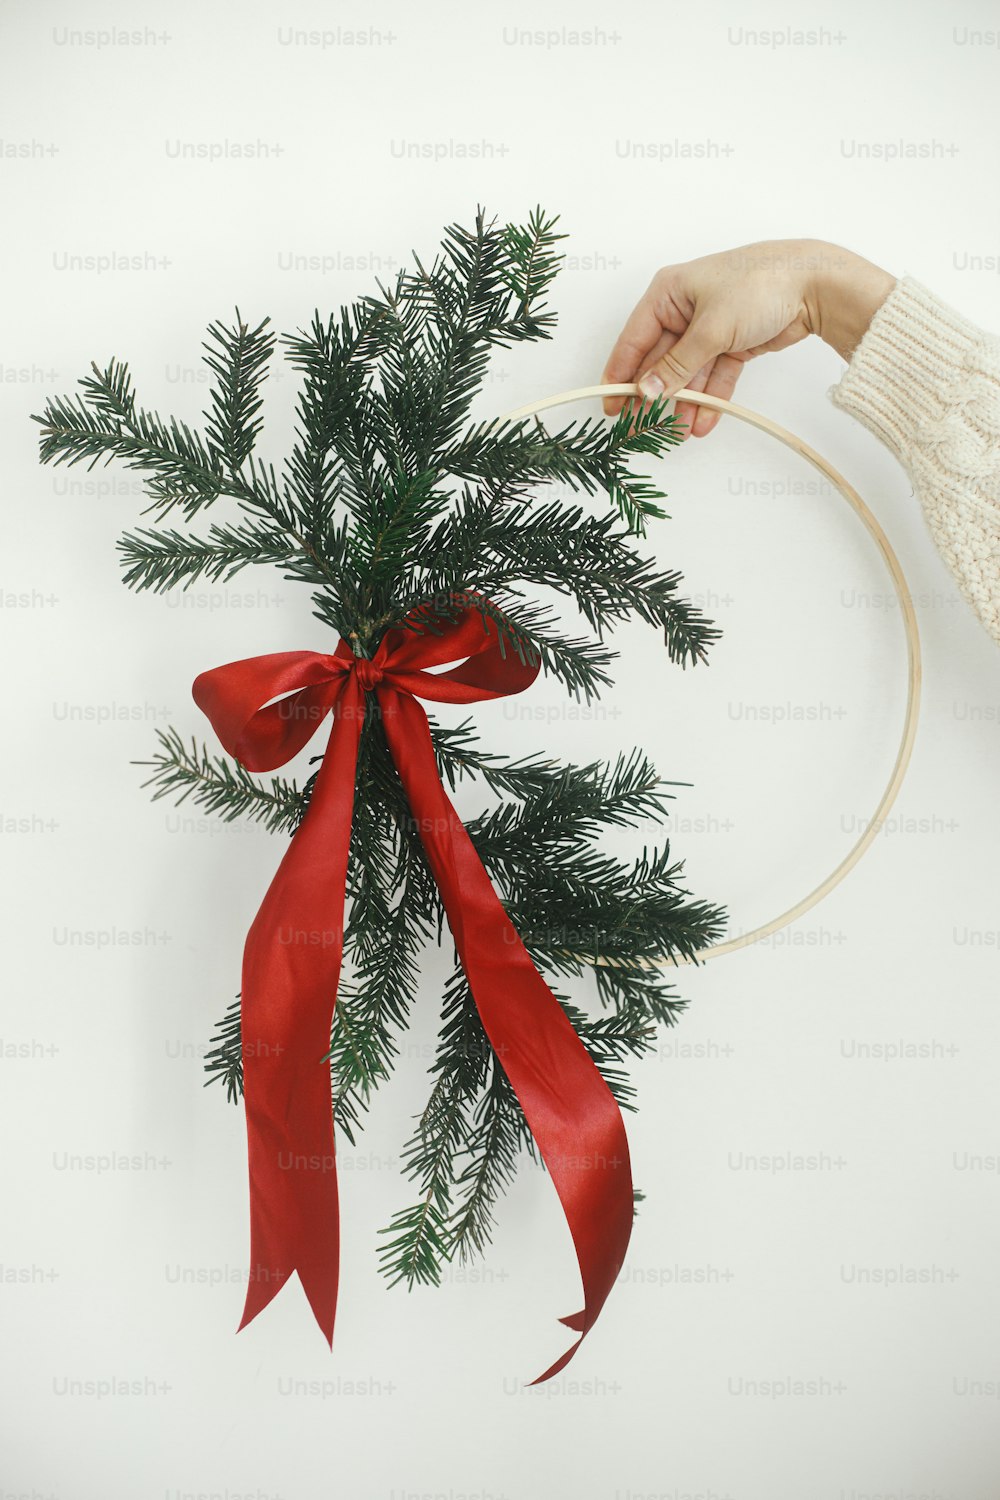 Hand in cozy sweater holding modern christmas wreath on white wall background. Merry Christmas and Happy holidays! Stylish minimalistic xmas wreath with fir branches and red bow in hand